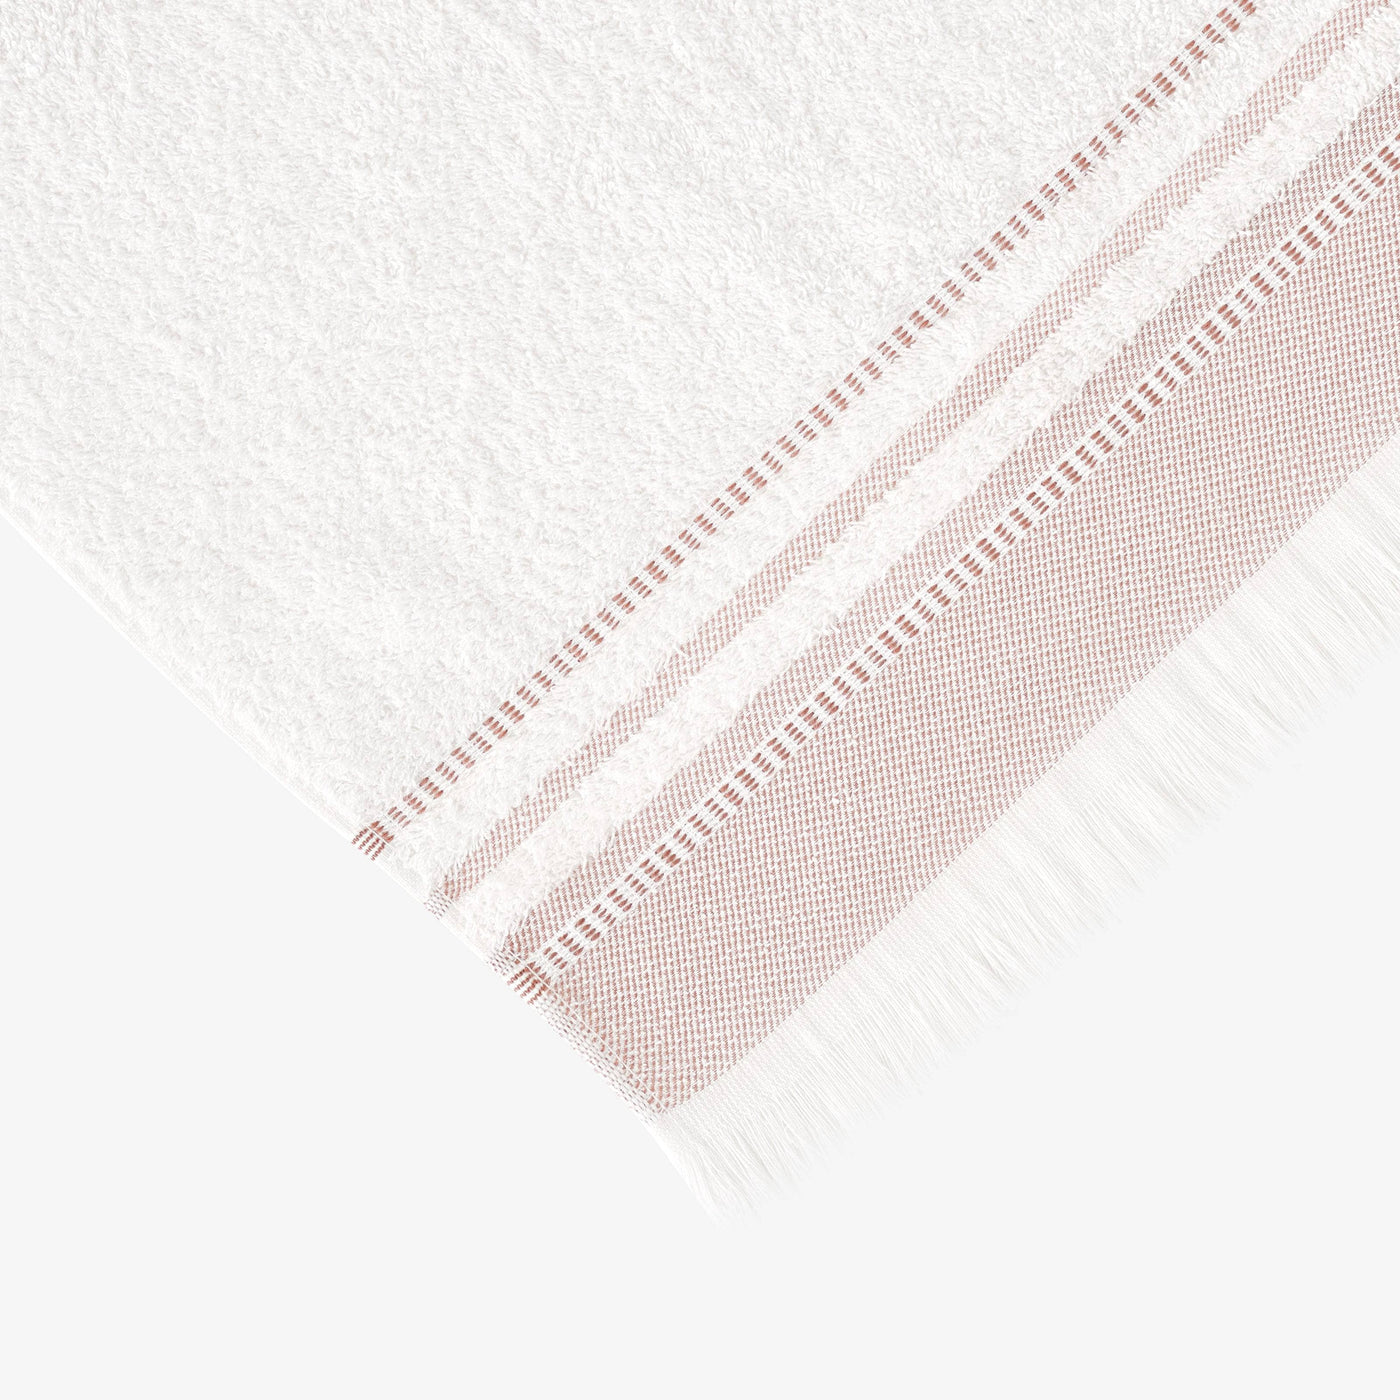 Betty Set of 2 Border Striped 100% Turkish Cotton Hand Towels, Off-White - Cinnamon Hand Towels sazy.com